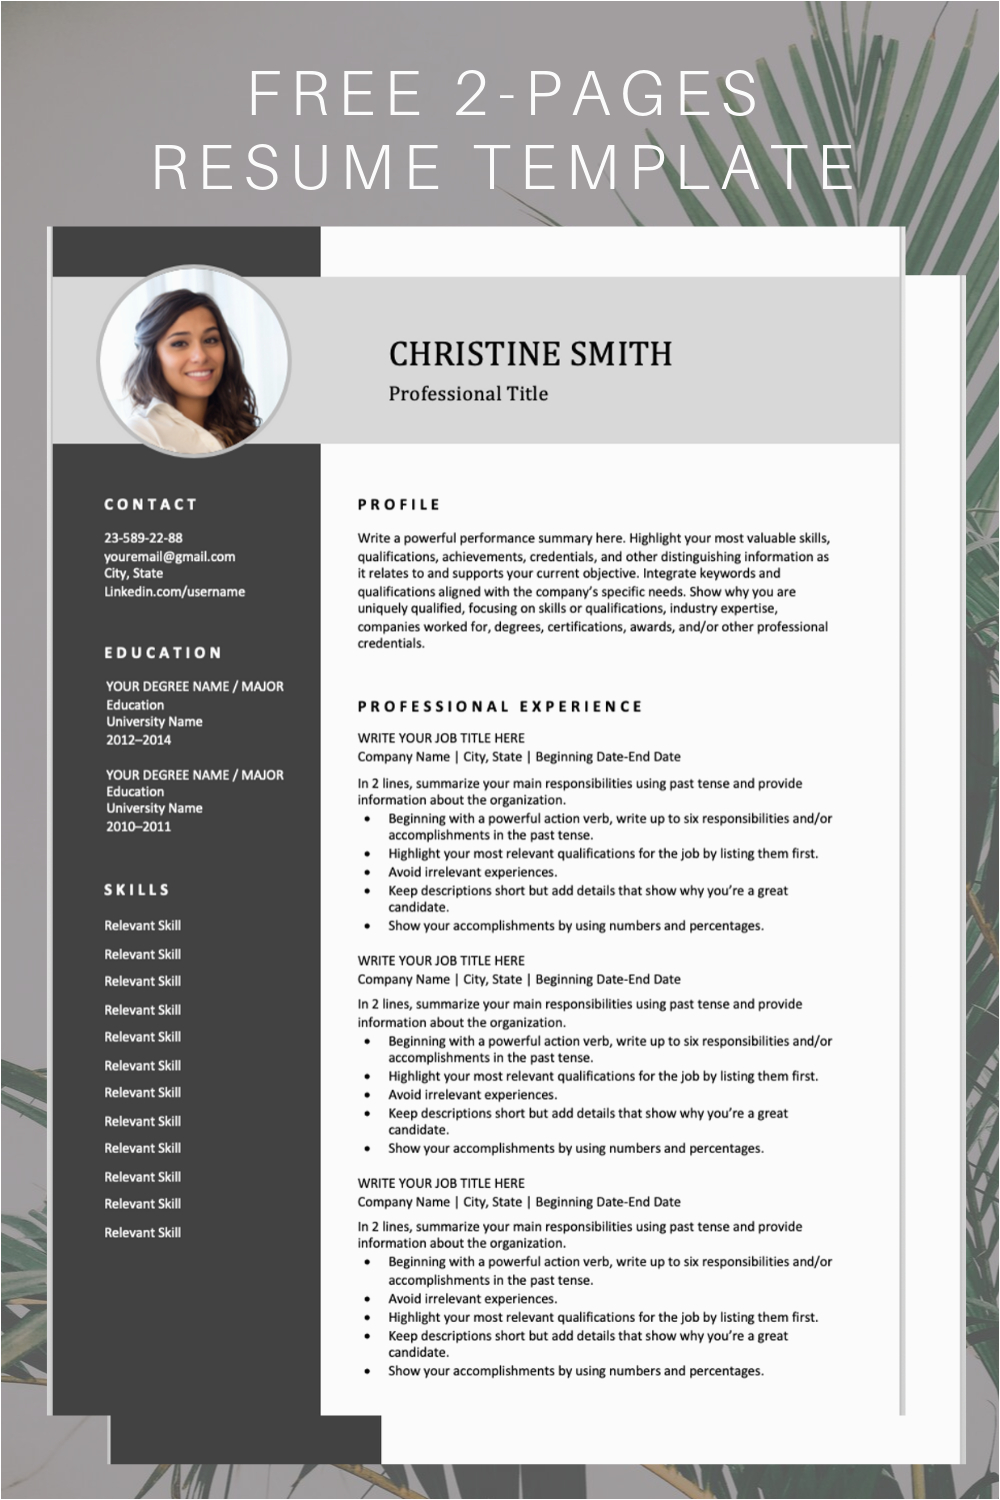 Free Resume Templates without Signing Up attractive Resume Templates Free Download without Sign Up